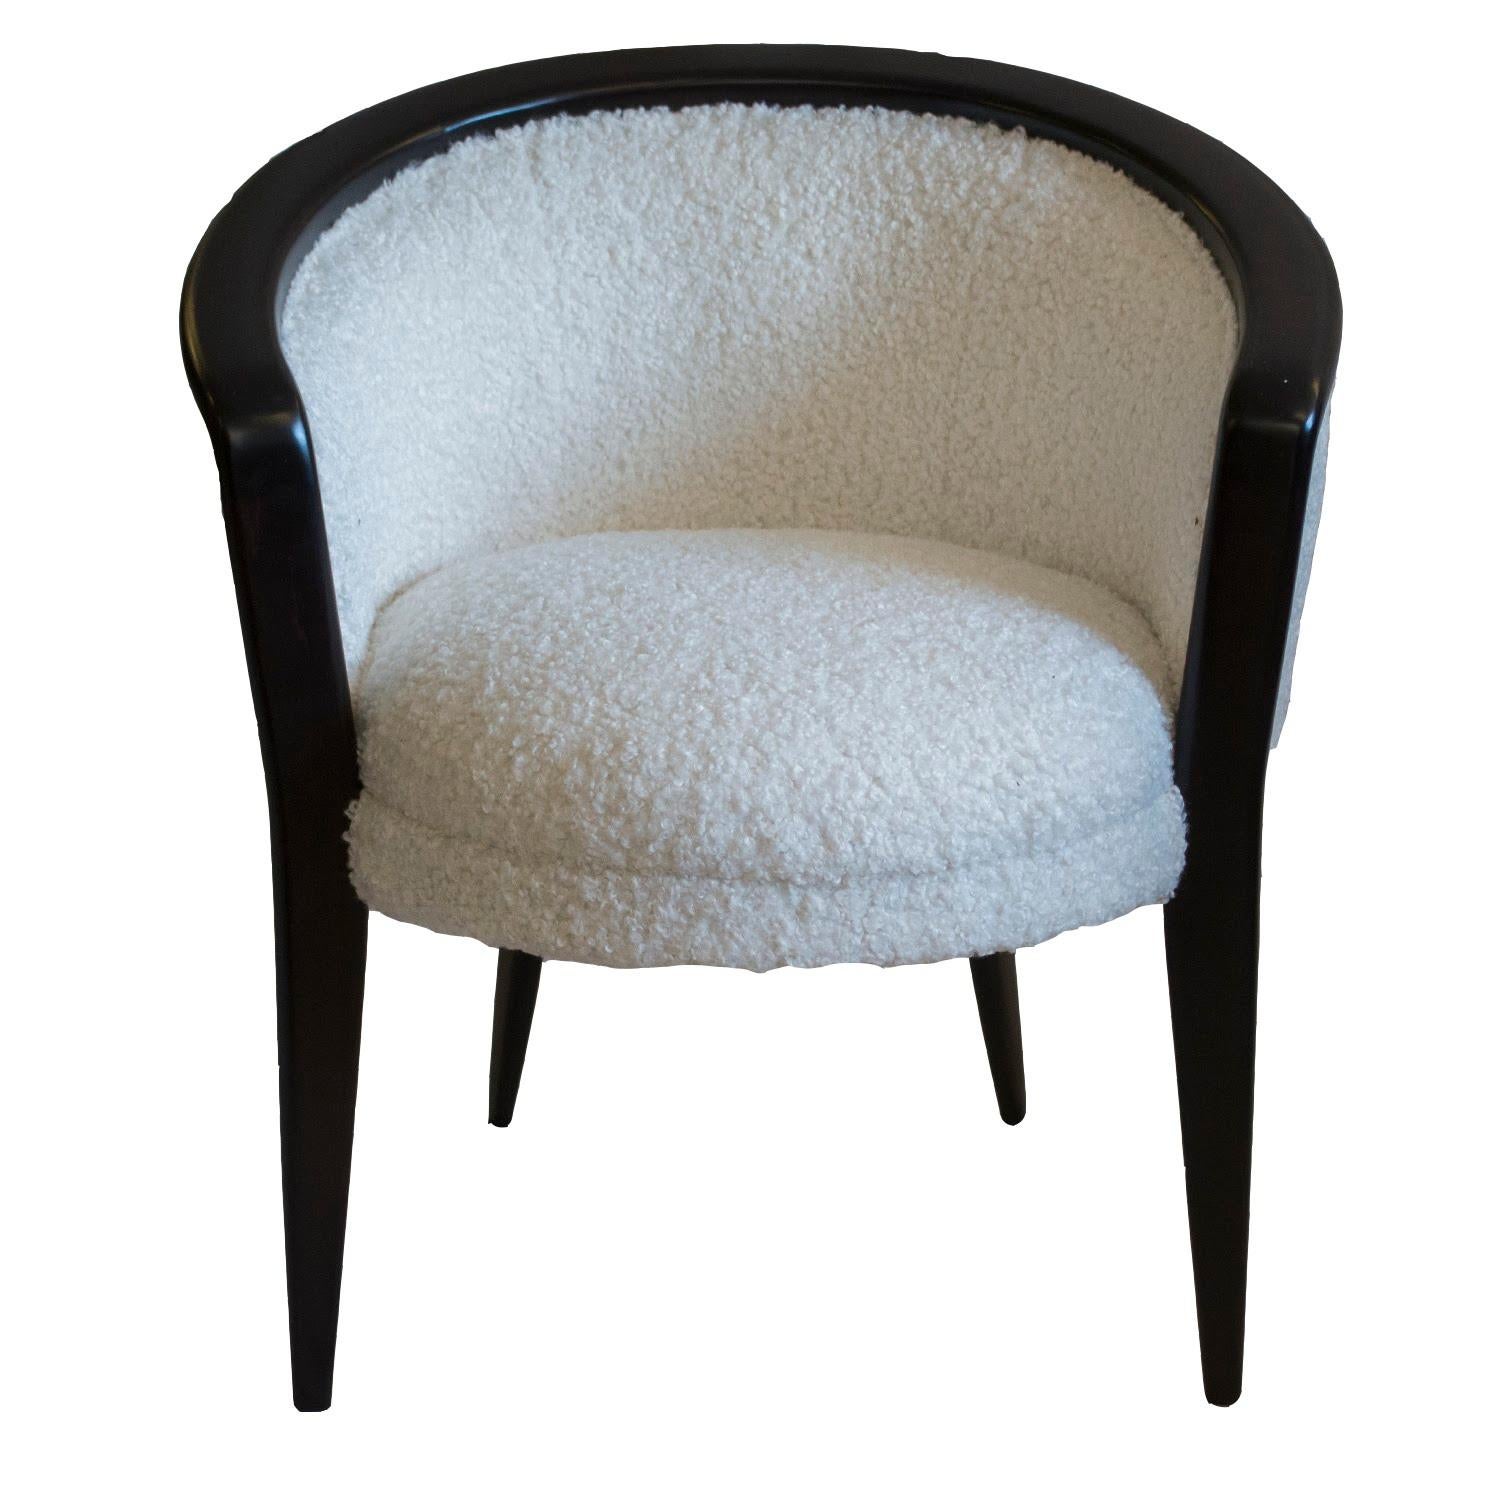 Late 20th Century Post-Modern Bespoke French Barrel Chairs For Sale